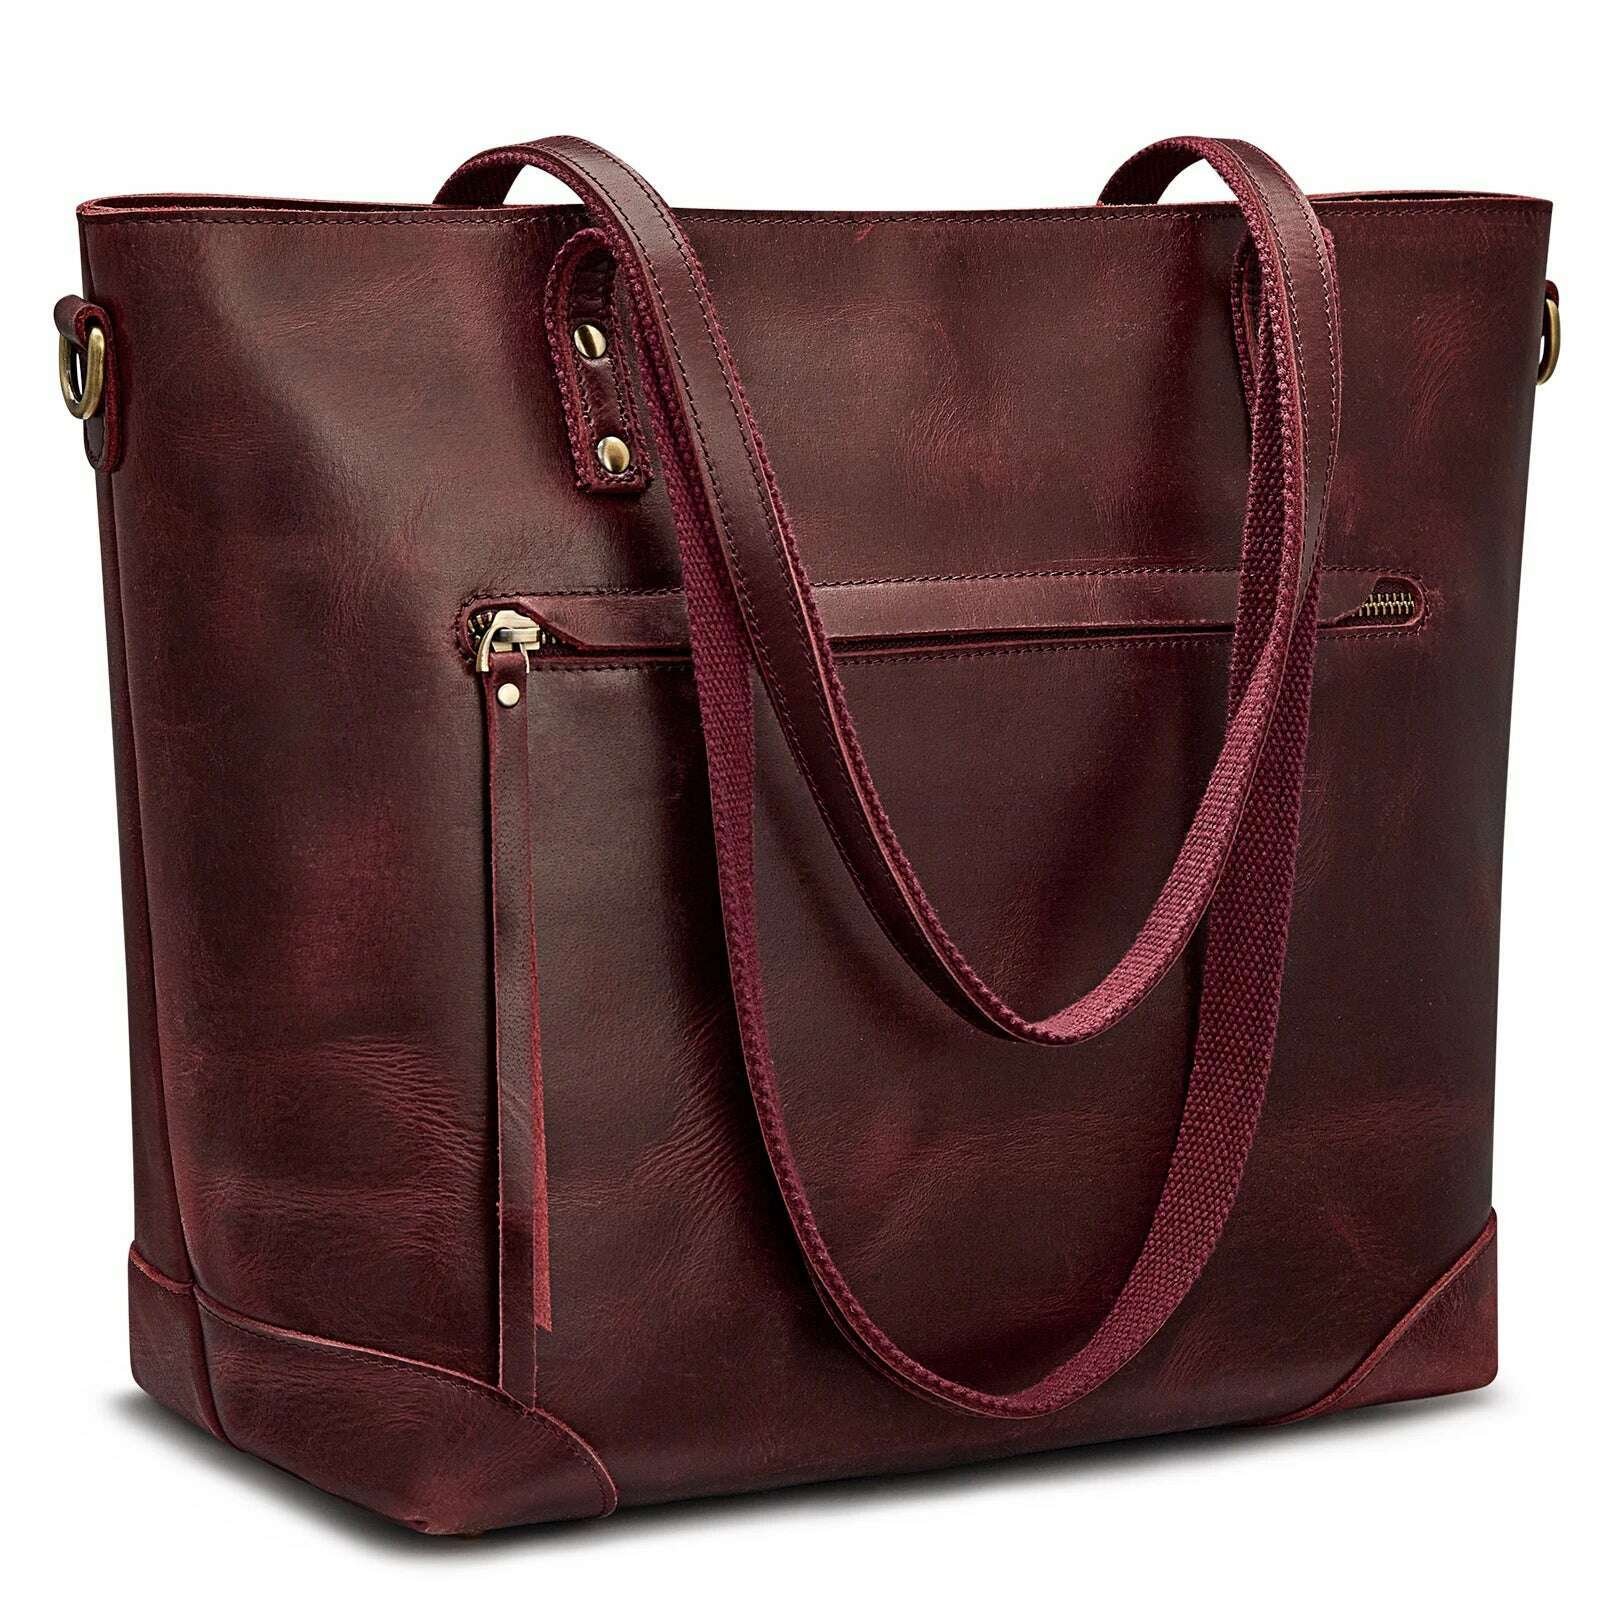 KIMLUD, S-ZONE Vintage Genuine Leather Shoulder Bag Work Totes for Women Purse Handbag with Back Zipper Pocket Large, Wine Red / China, KIMLUD Womens Clothes